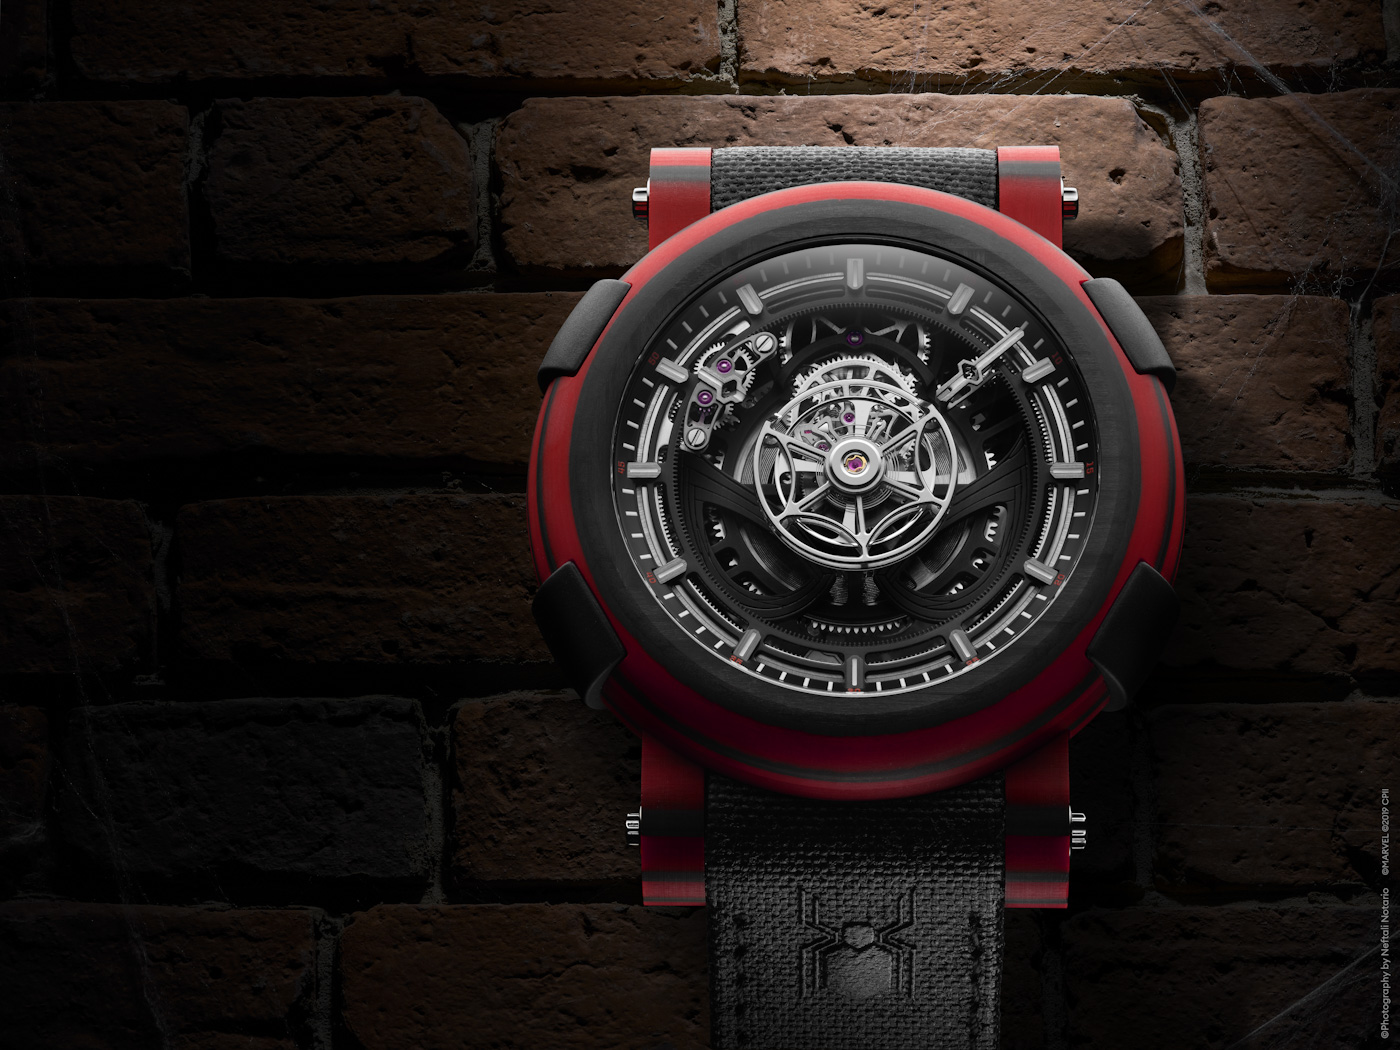 RJ Brings Spider-Man To Haute Horlogerie With Two New Limited-Edition Models